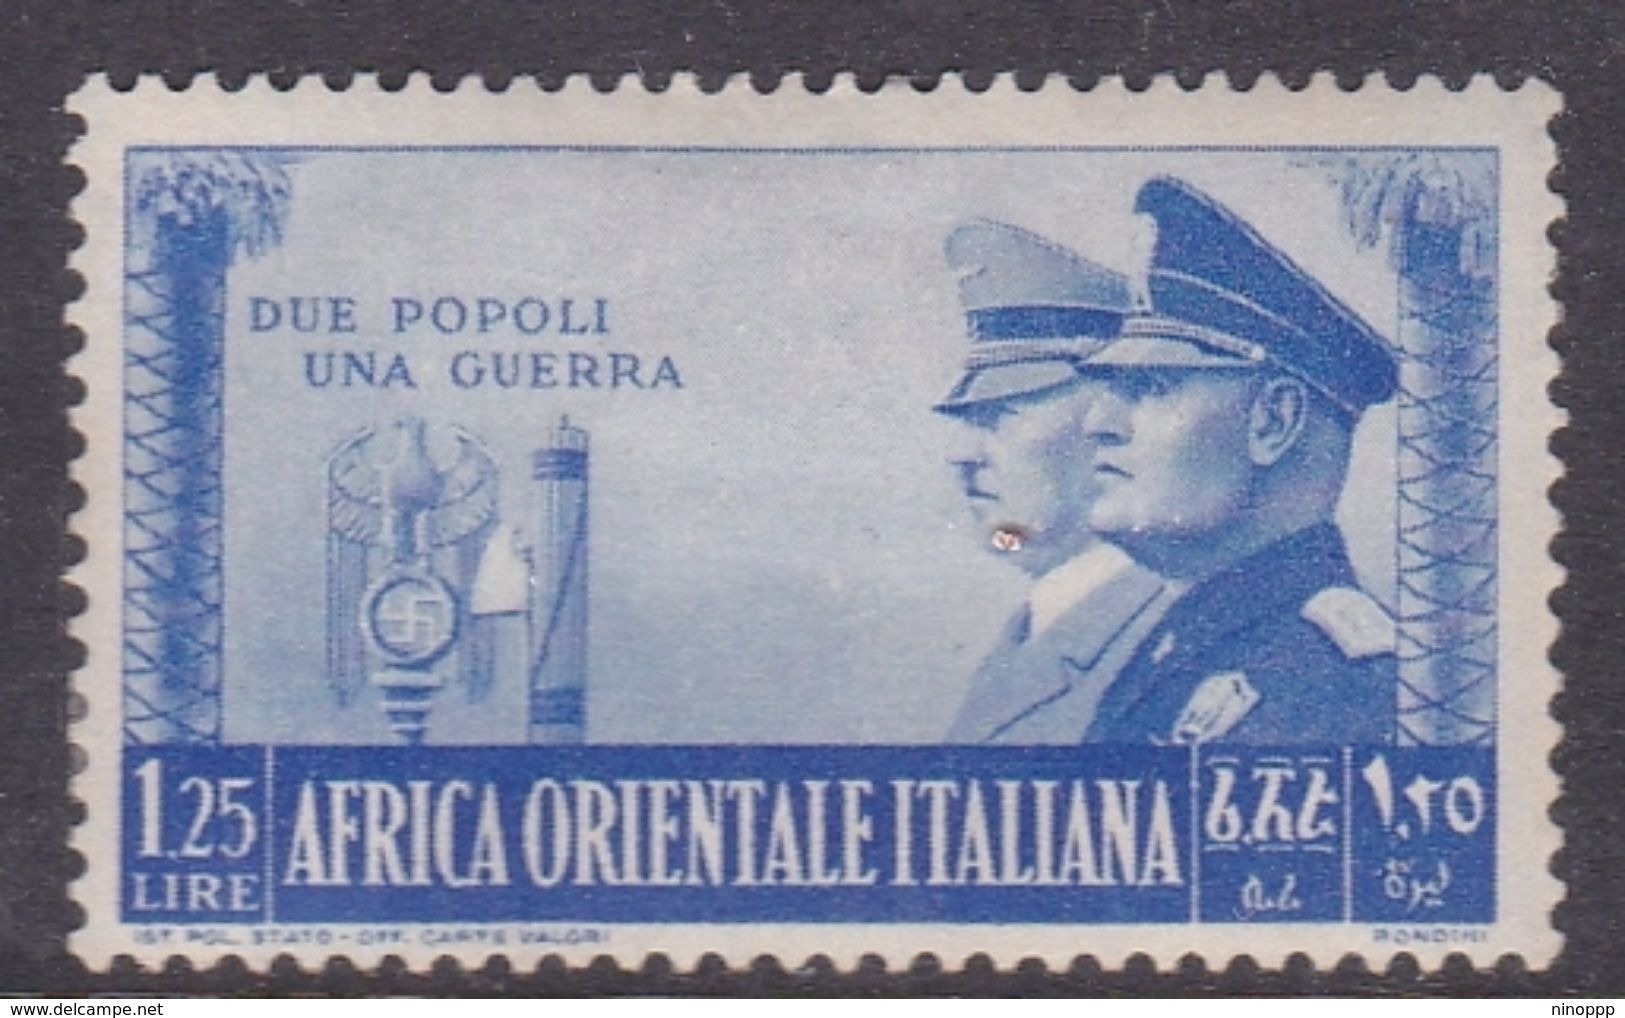 Italy-Colonies And Territories-Italian Eastern Africa S40 1941 Two Peoples One War 1,25 Lira Bright Ultra MH - Algemene Uitgaven